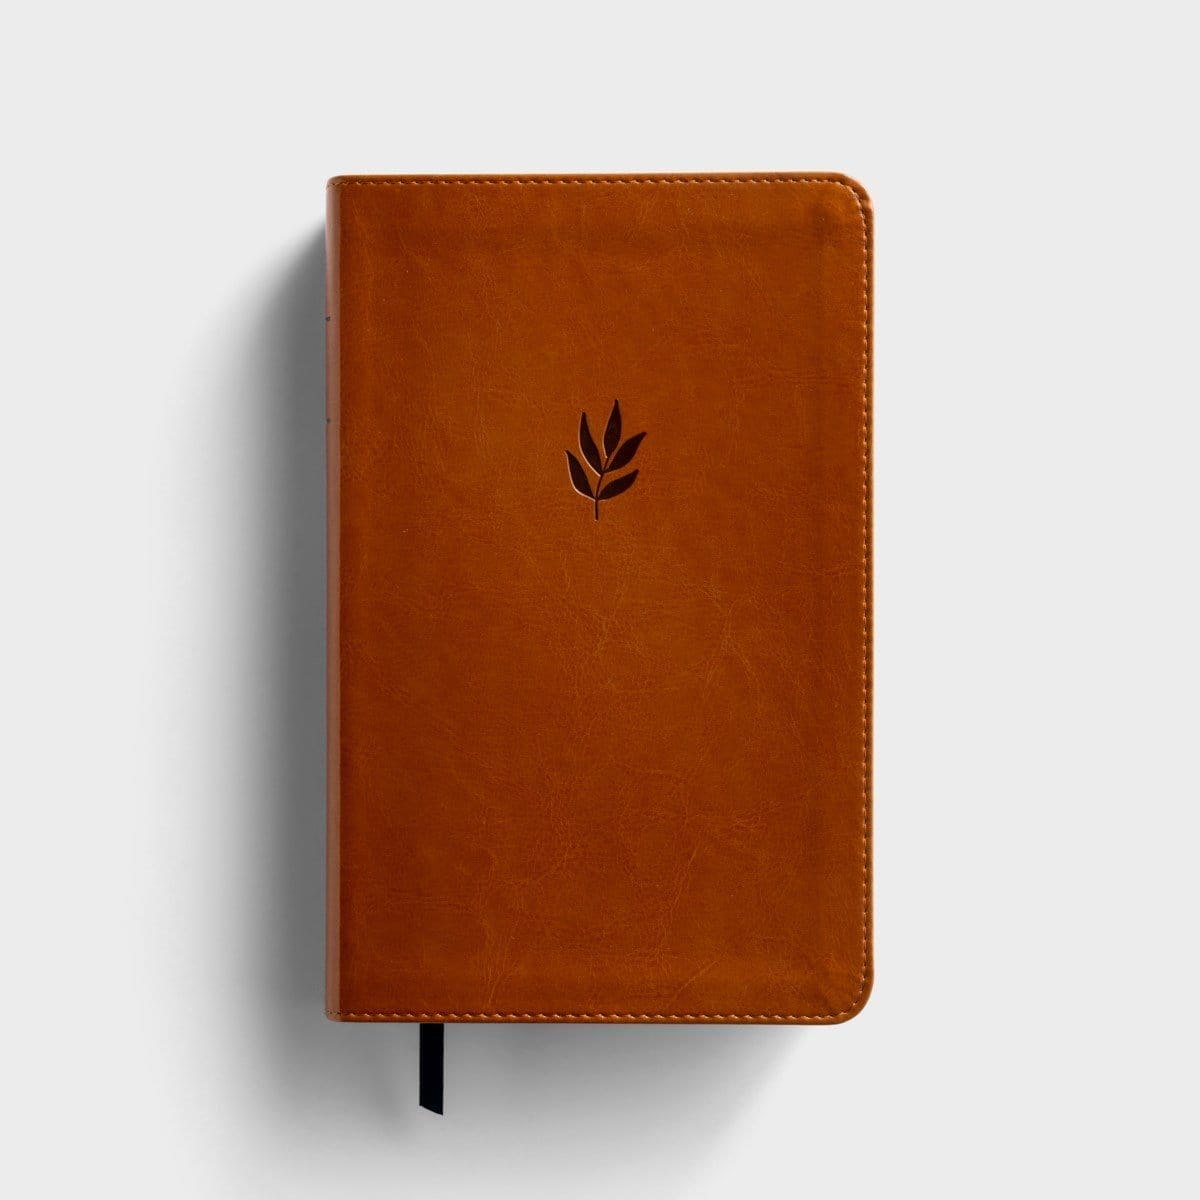 NLT - DaySpring Signature Collection - Personal Size Giant Print Bible - Tan LeatherLike - Filament Enabled